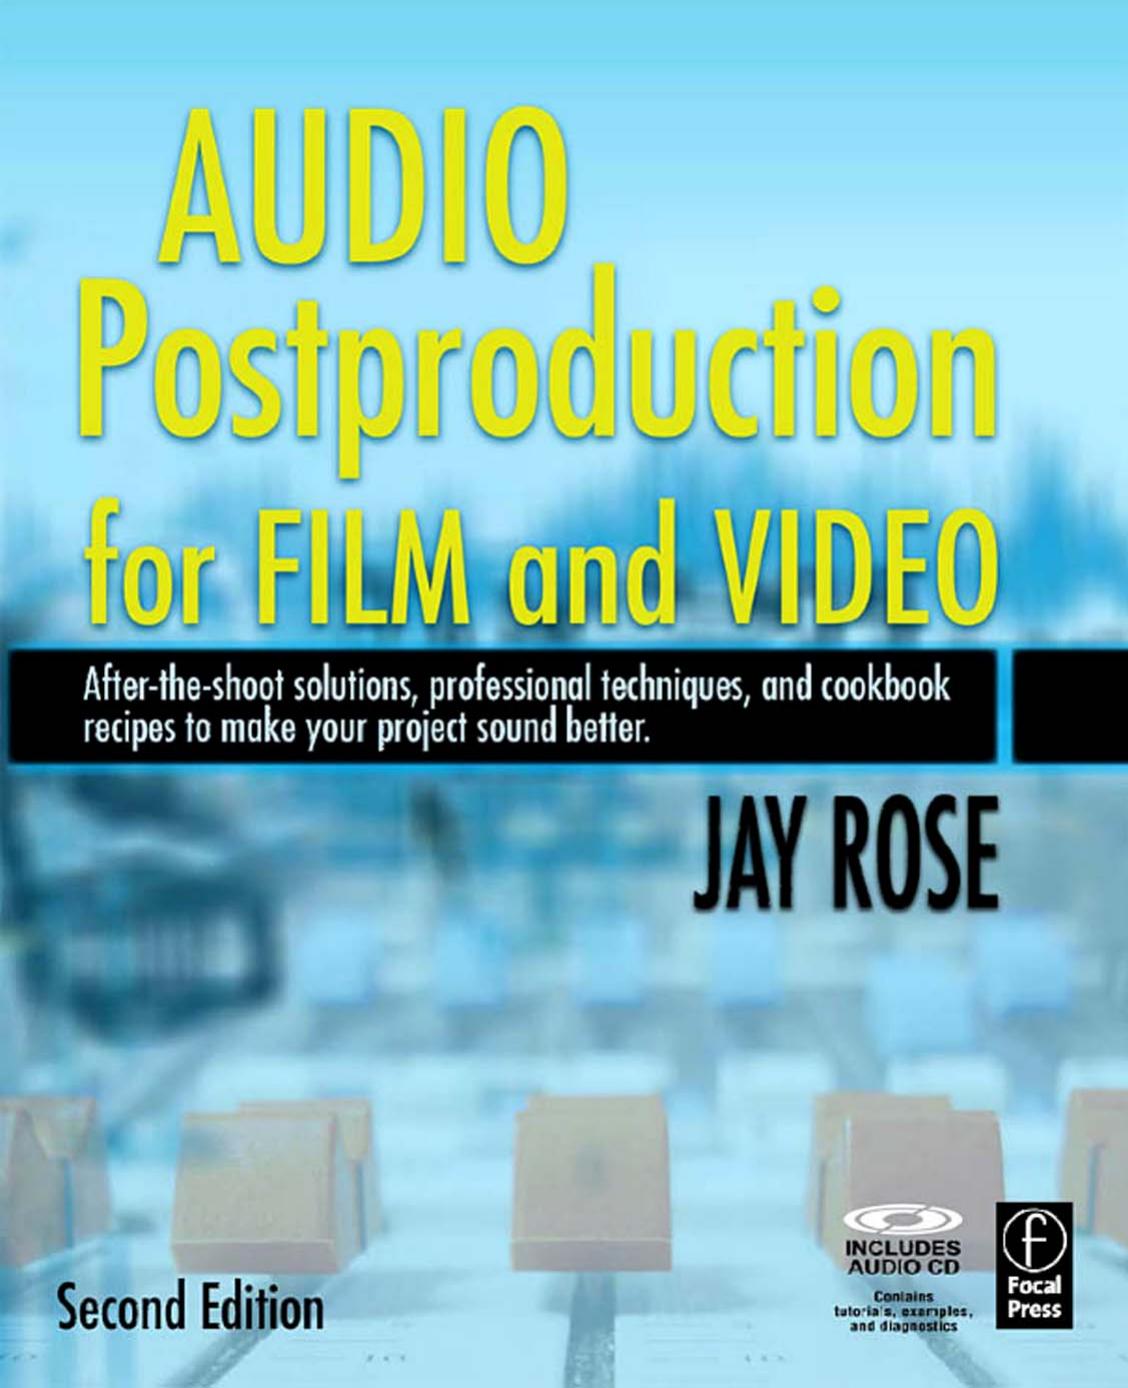 Audio Postproduction for Film and Video, Second Edition (DV Expert Series)